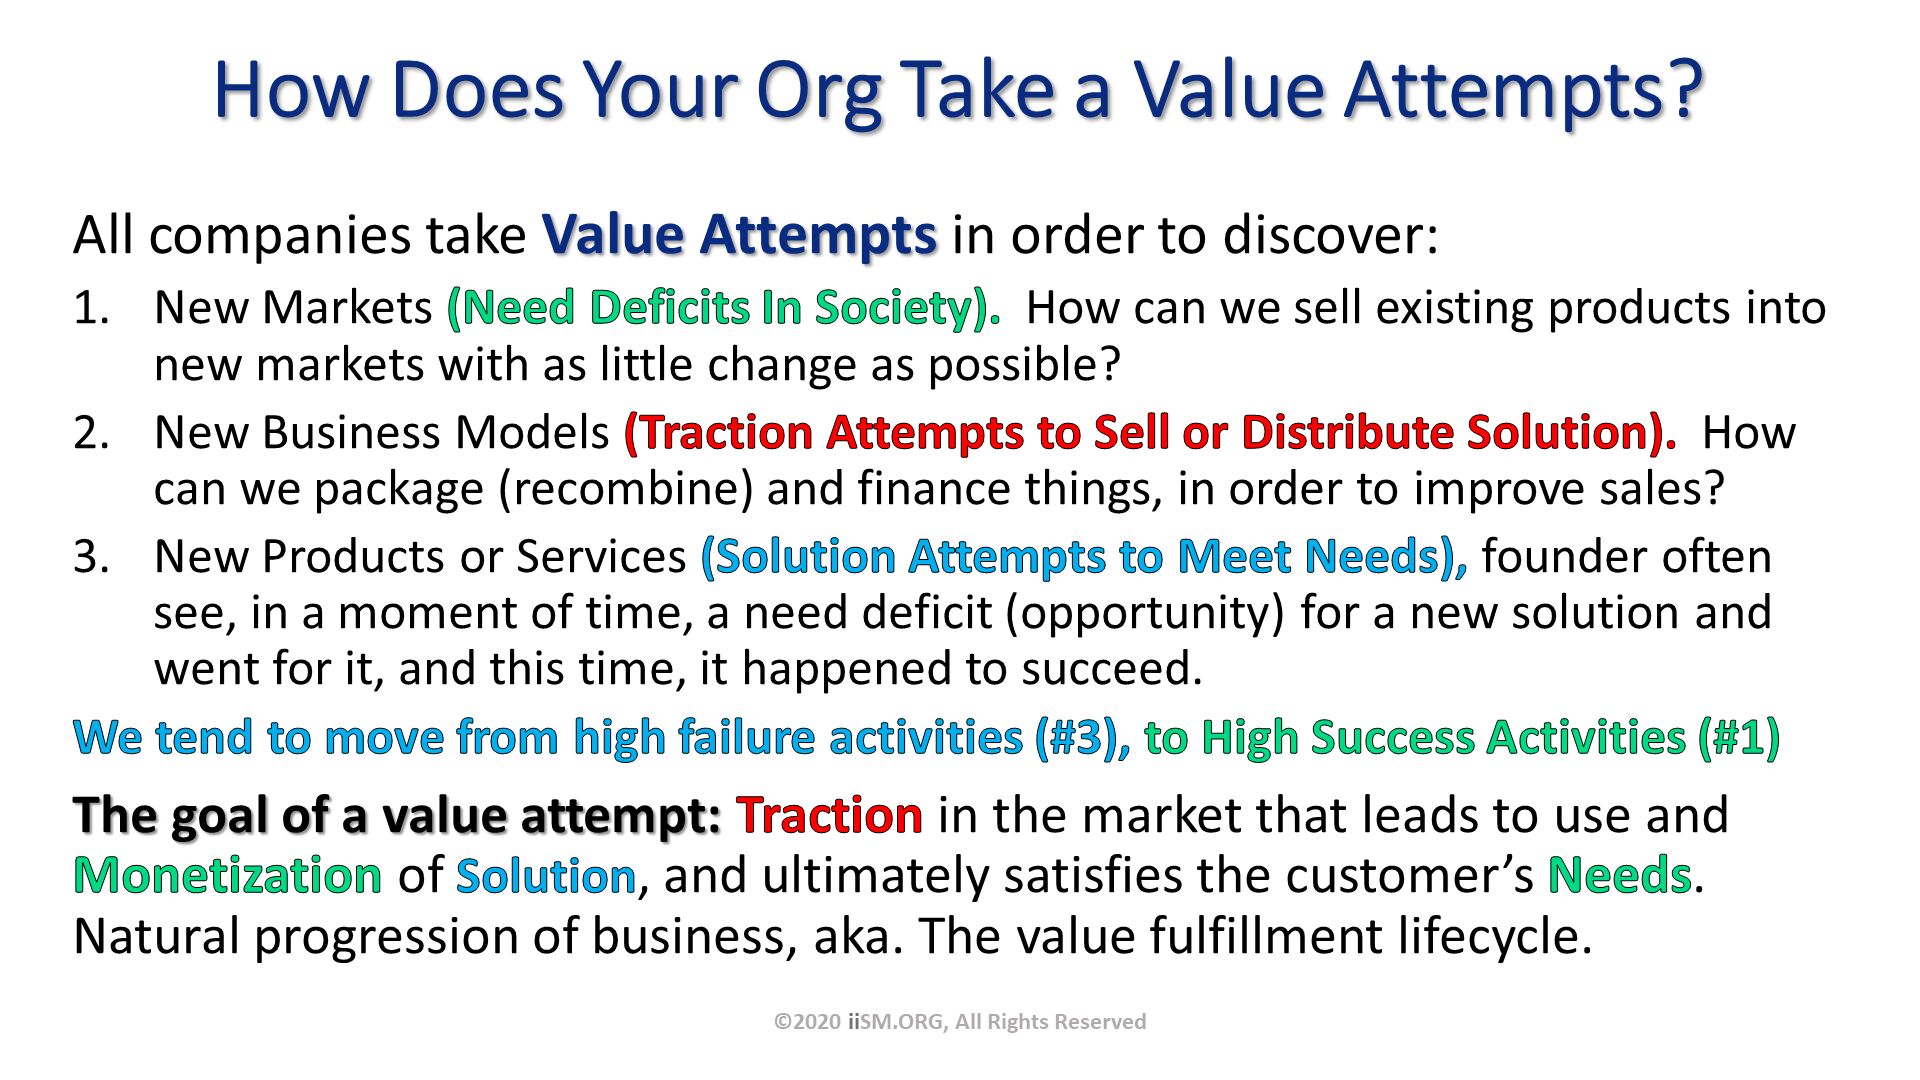 How Does Your Org Take a Value Attempts?. ©2020 iiSM.ORG, All Rights Reserved. All companies take Value Attempts in order to discover:
New Markets (Need Deficits In Society).  How can we sell existing products into new markets with as little change as possible?
New Business Models (Traction Attempts to Sell or Distribute Solution).  How can we package (recombine) and finance things, in order to improve sales?
New Products or Services (Solution Attempts to Meet Needs), founder often see, in a moment of time, a need deficit (opportunity) for a new solution and went for it, and this time, it happened to succeed.
We tend to move from high failure activities (#3), to High Success Activities (#1)
The goal of a value attempt: Traction in the market that leads to use and Monetization of Solution, and ultimately satisfies the customer’s Needs. Natural progression of business, aka. The value fulfillment lifecycle. 